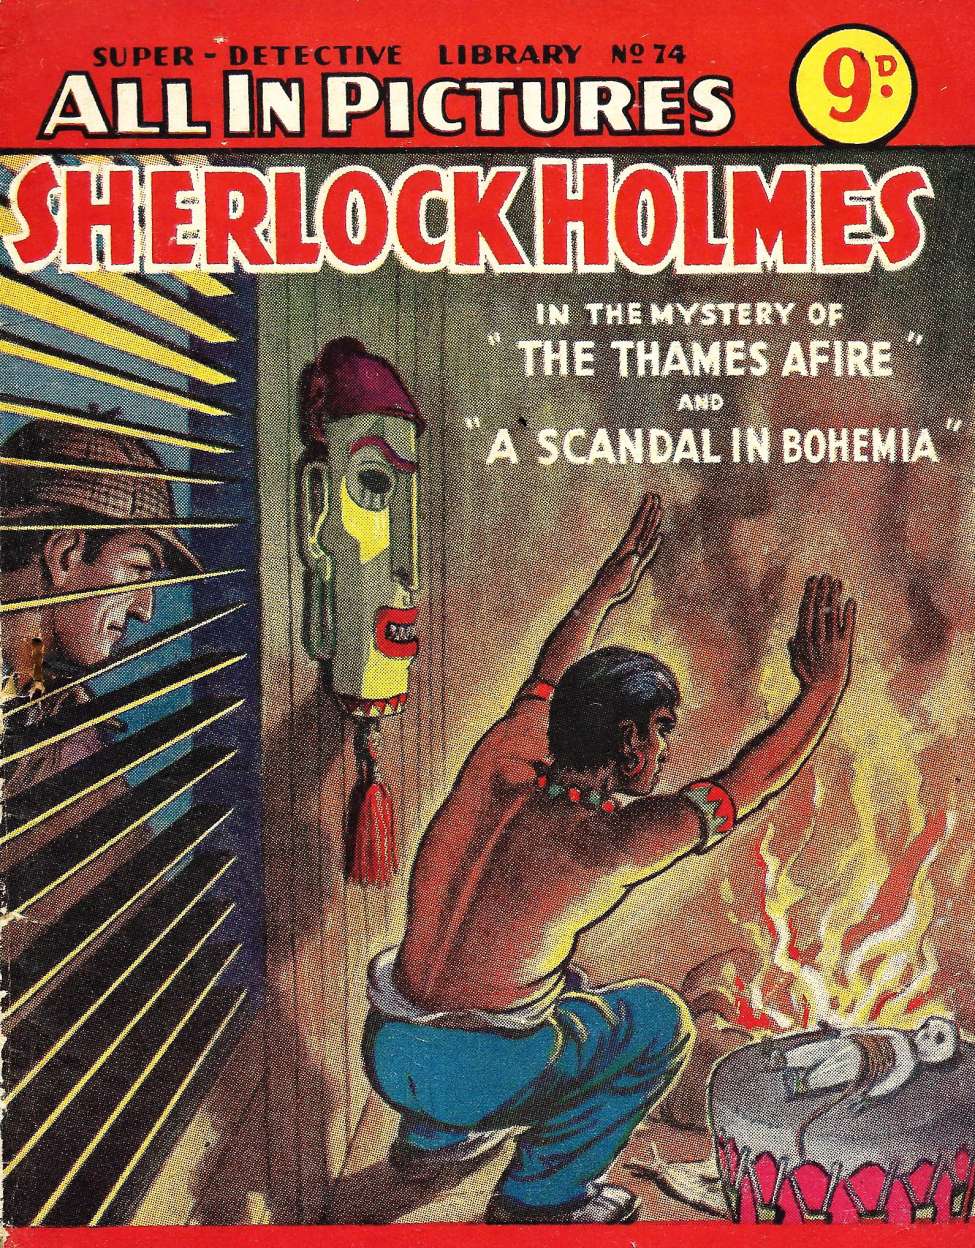 Book Cover For Super Detective Library 74 - Sherlock Holmes